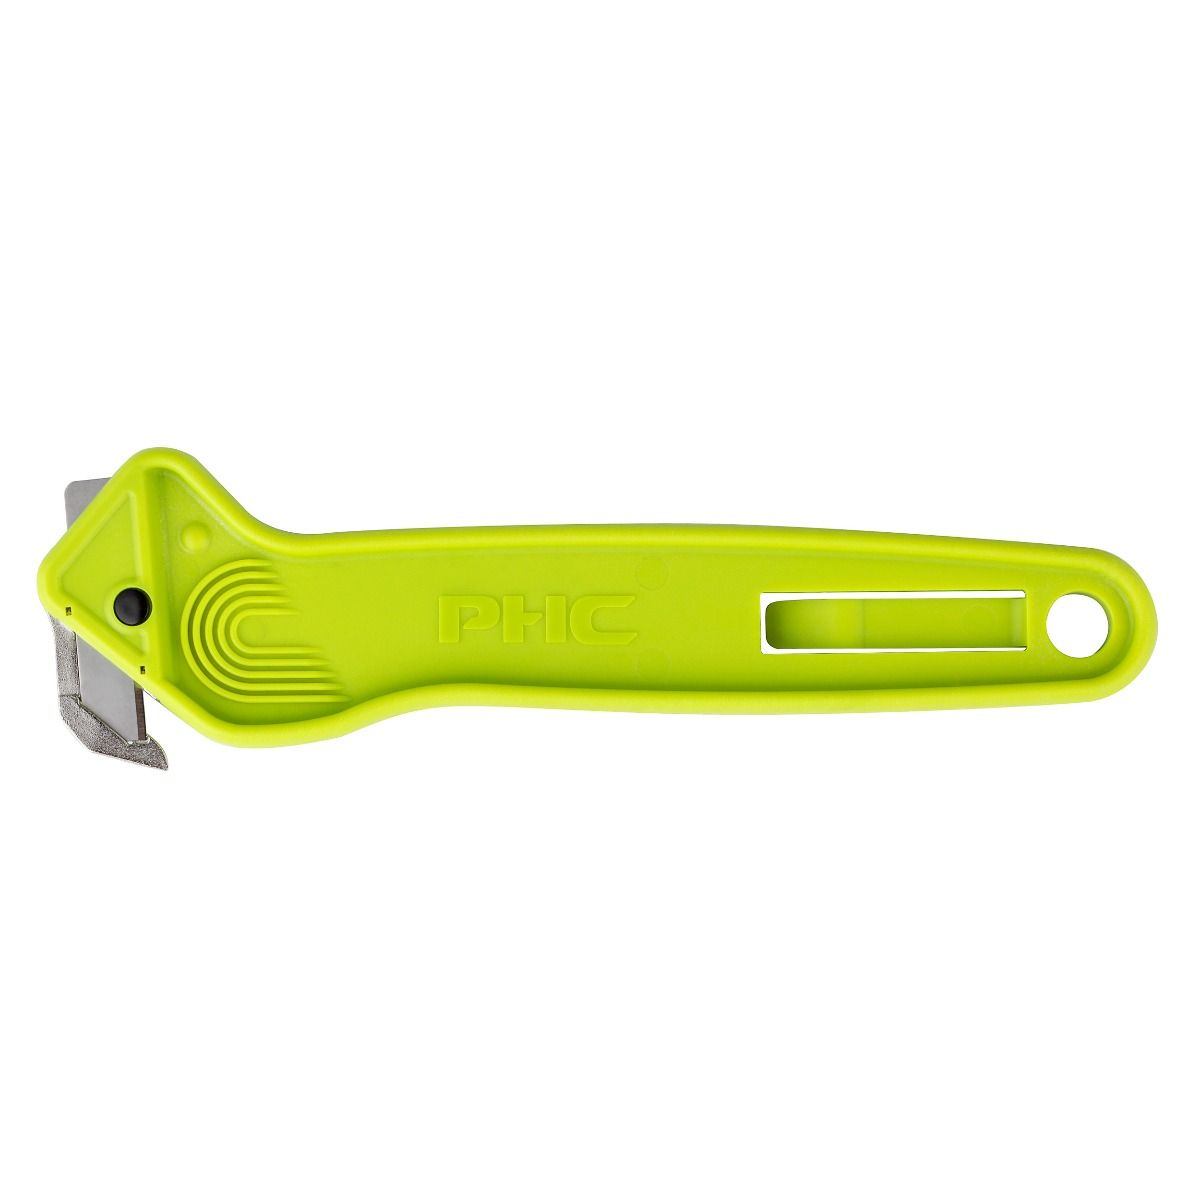 S4SR™ Guarded Auto-Retract Safety Knife, Right-Handed - Pacific Handy Cutter